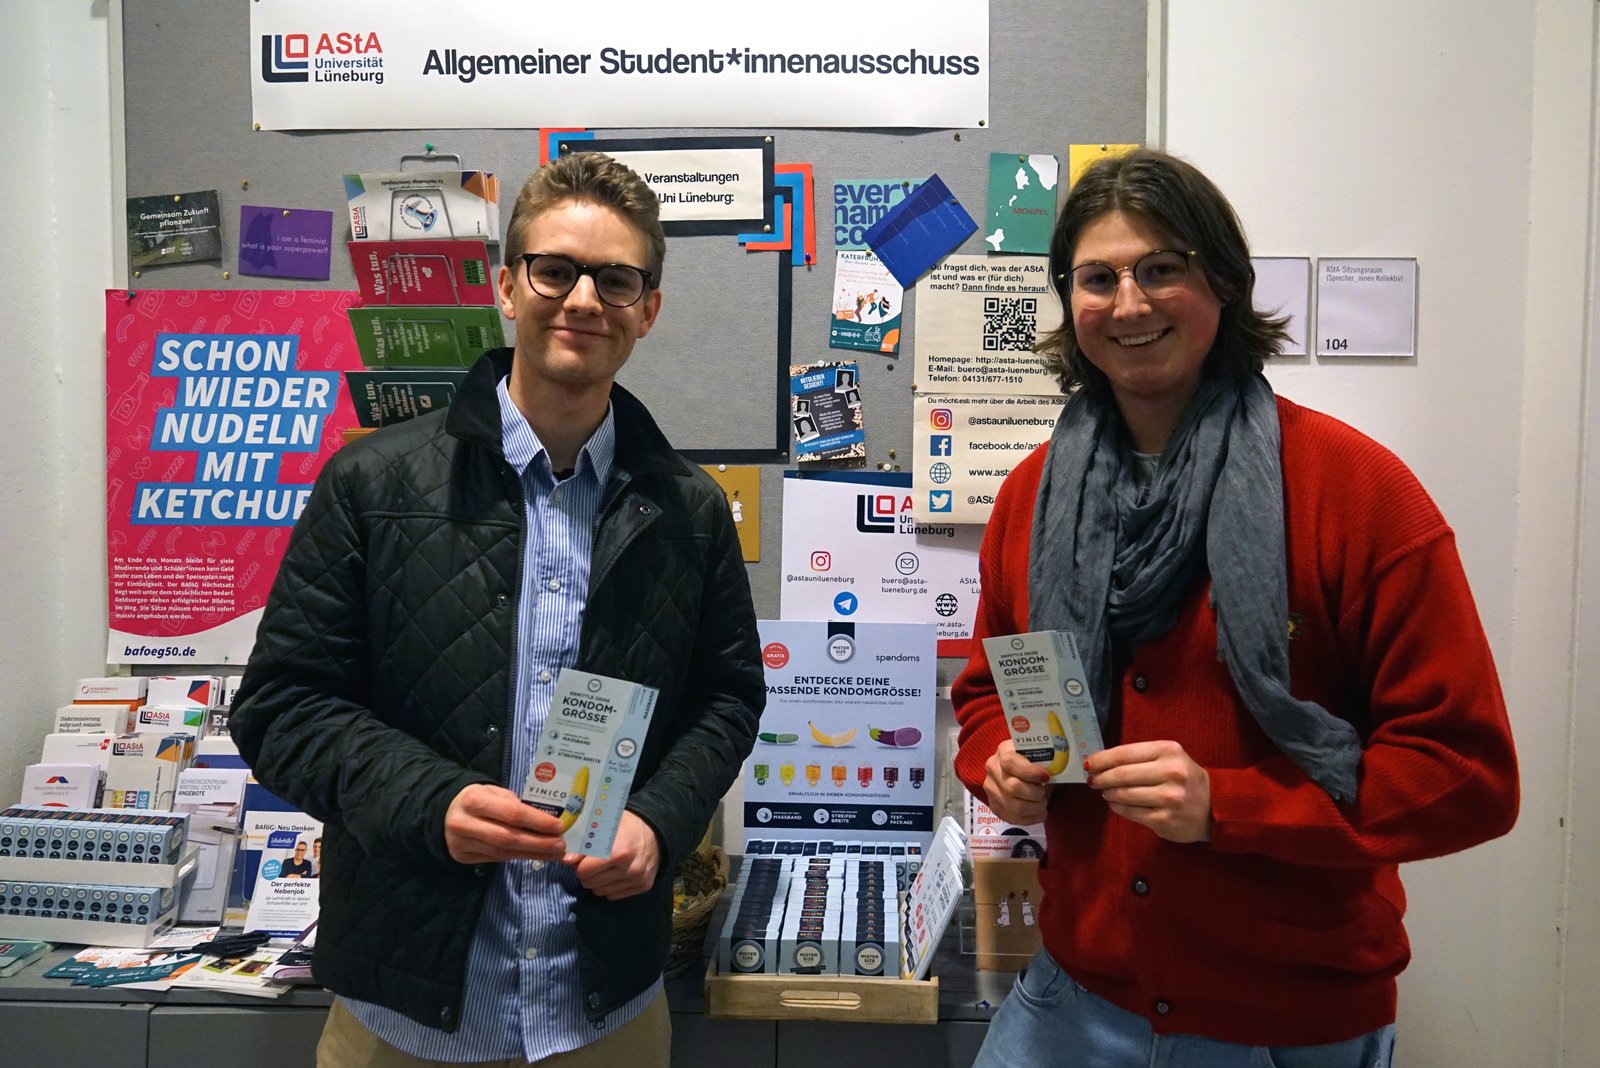 Luis from Spondoms (left) opens the free condom dispenser together with Max from the AStA of Leuphana University Lüneburg (right).